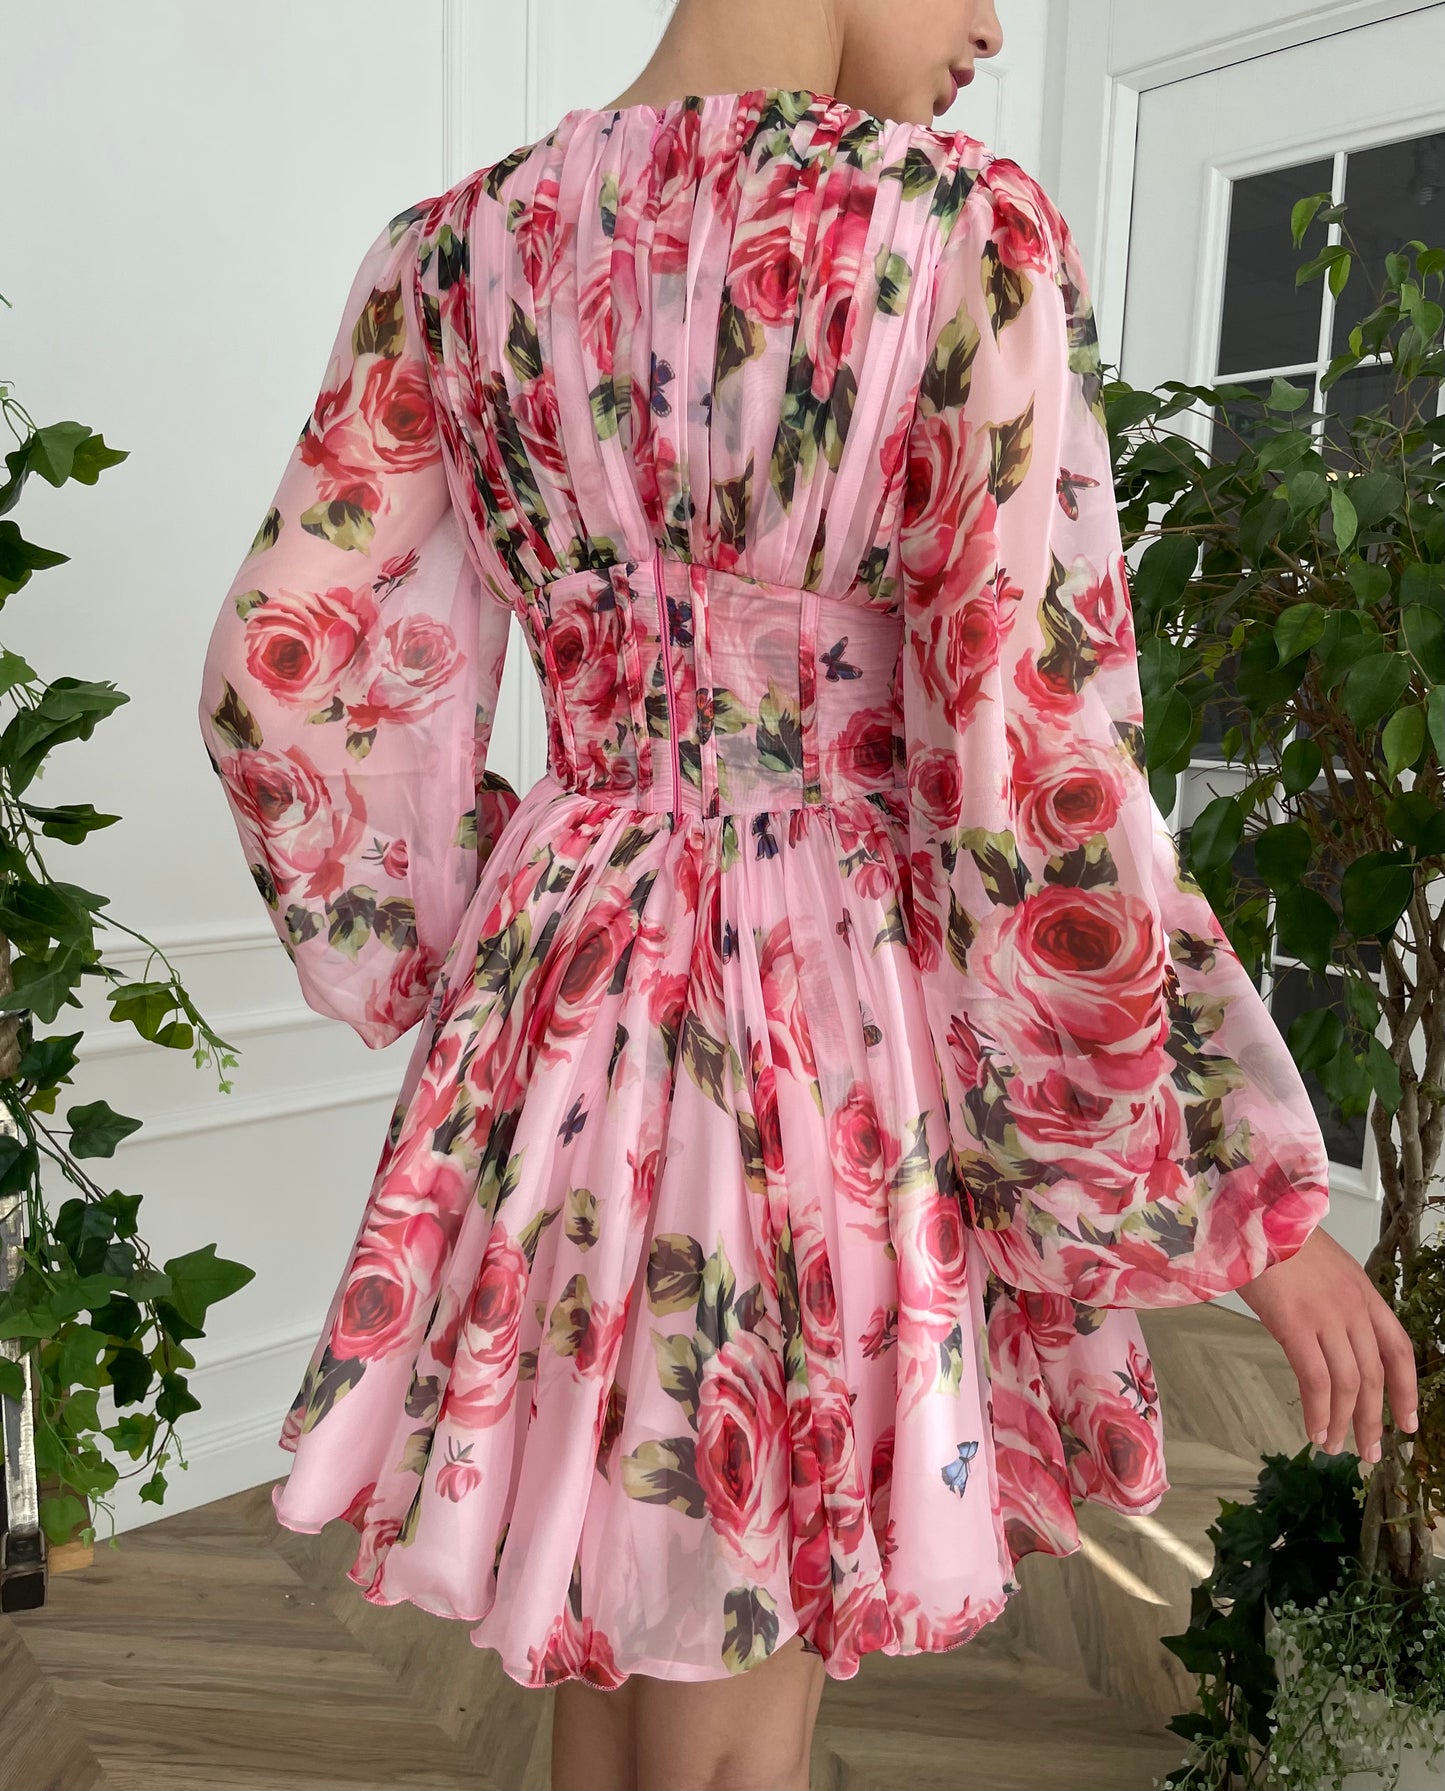 Pink mini dress with long sleeves and printed flowers